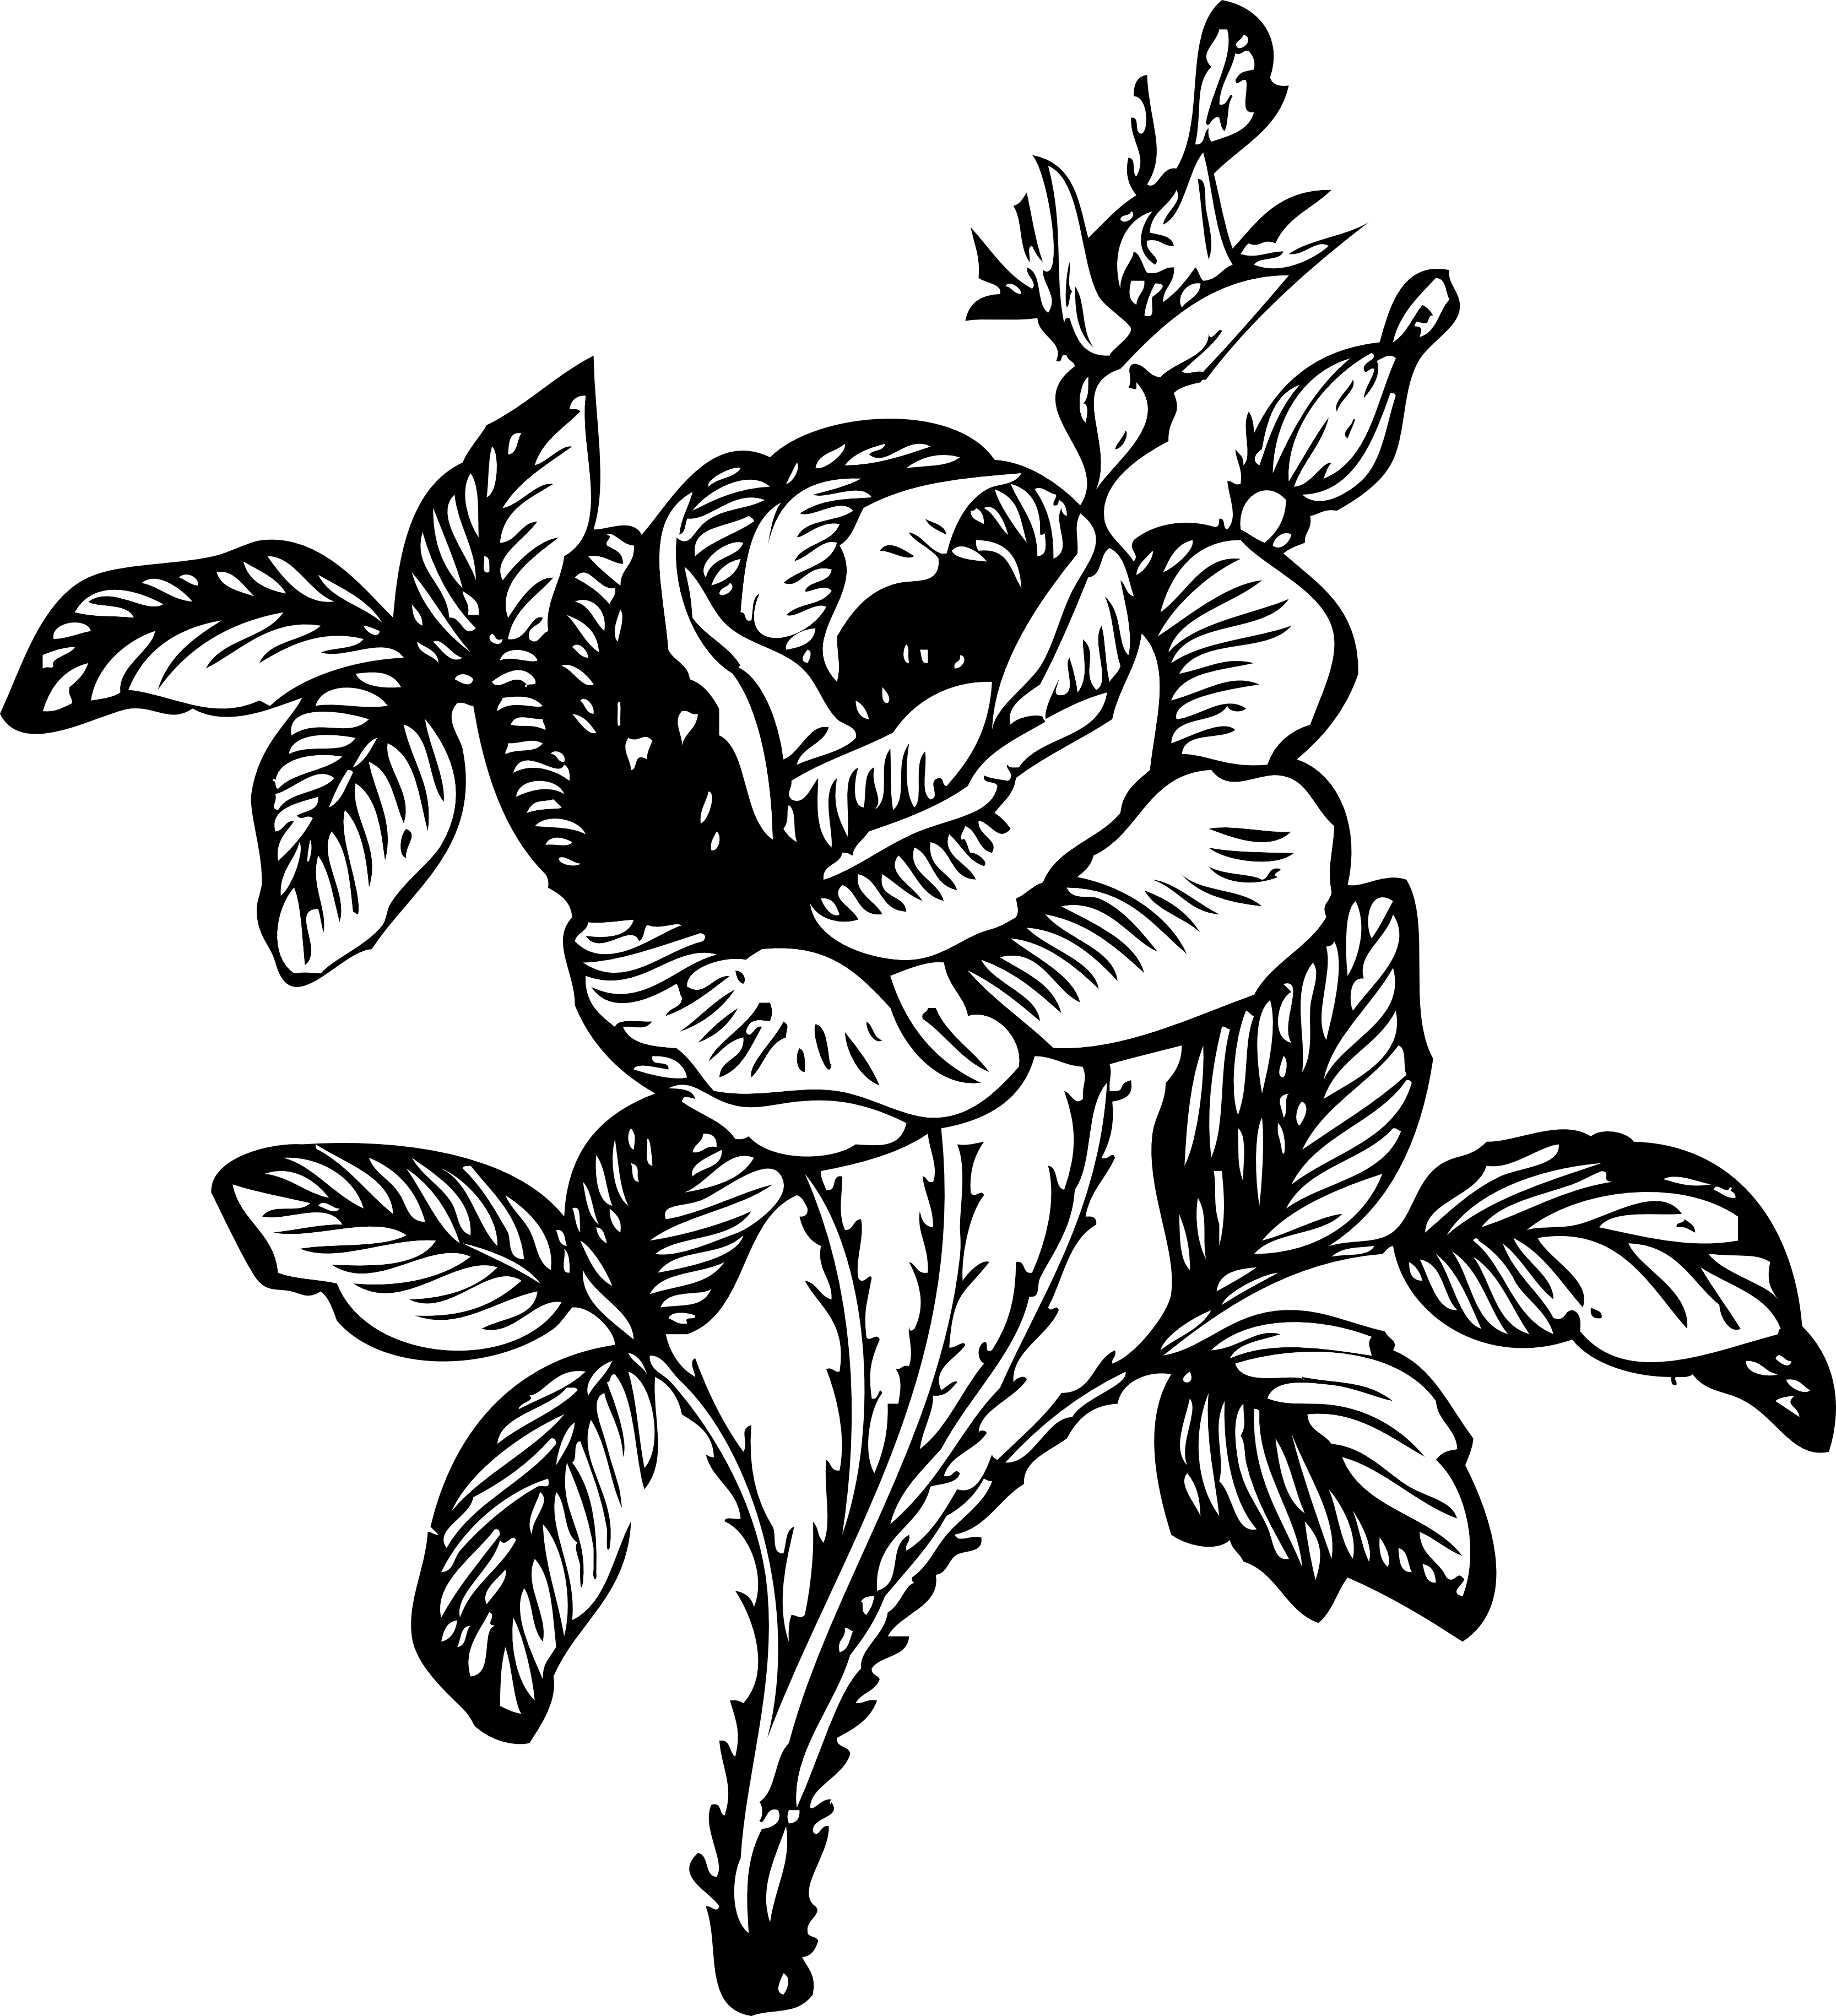 Rose 2 Black White Line Art Coloring Book Colouring